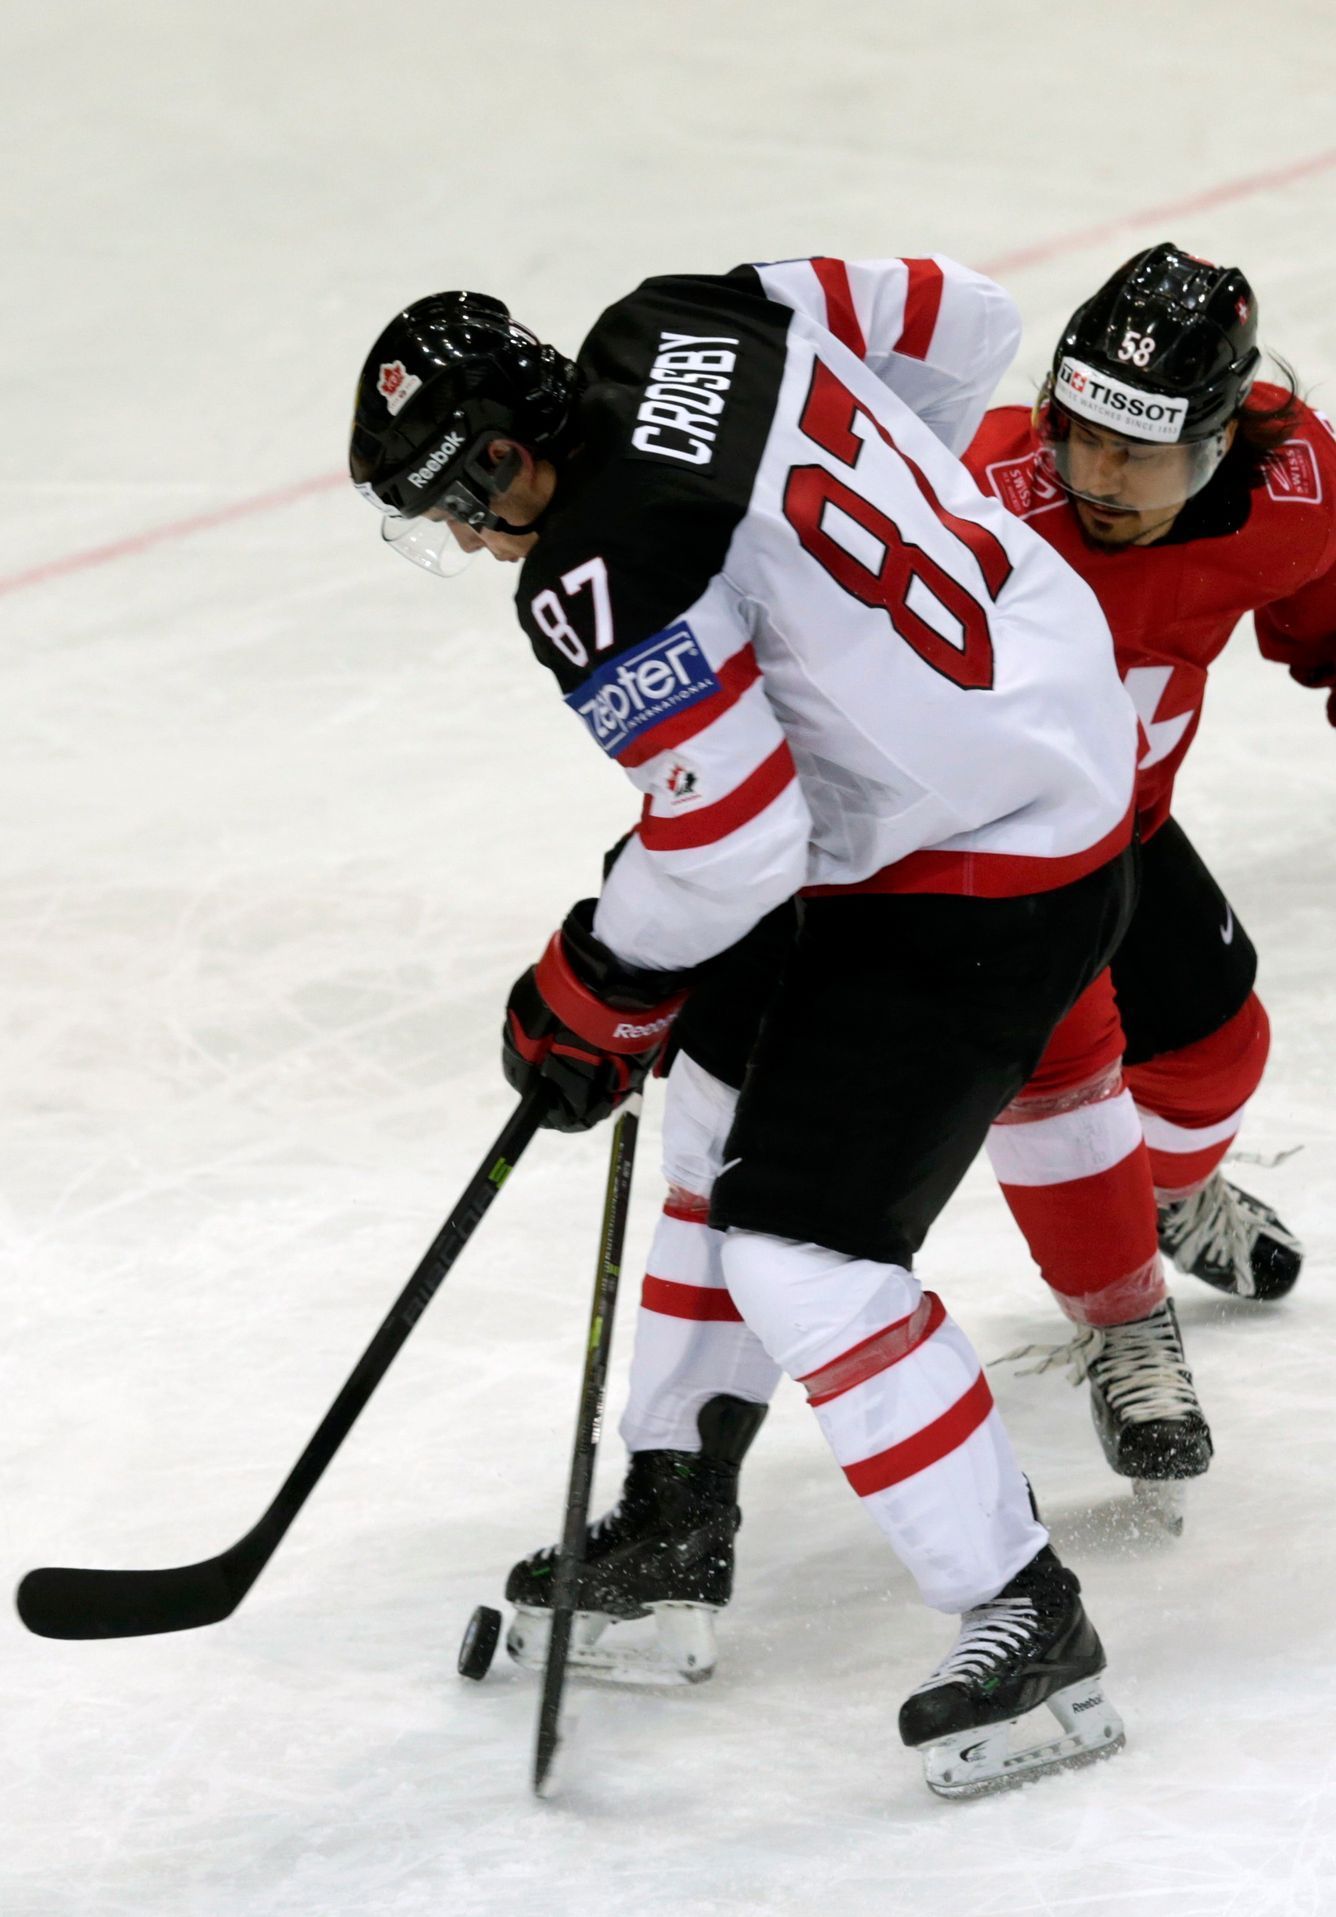 Canada's Crosby fights for the puck with Switzerland's Blum during their Ice Hockey World Championship game at the O2 arena in Prague